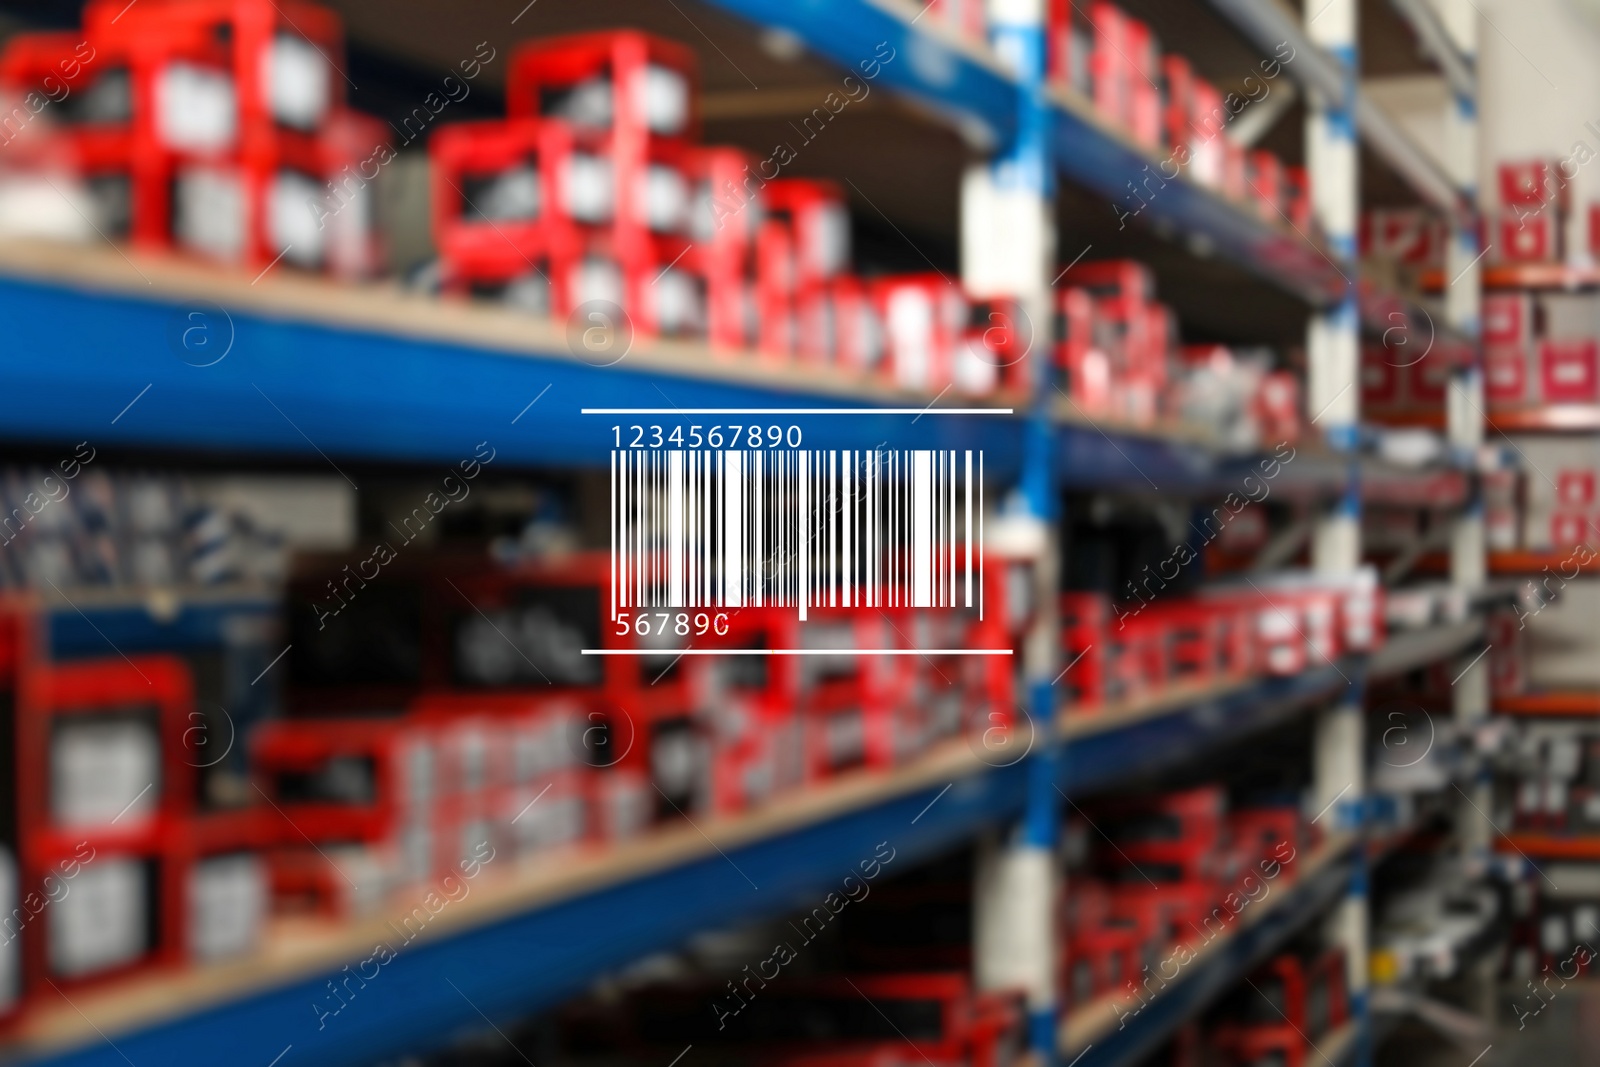 Image of Barcode and blurred view of modern wholesale store